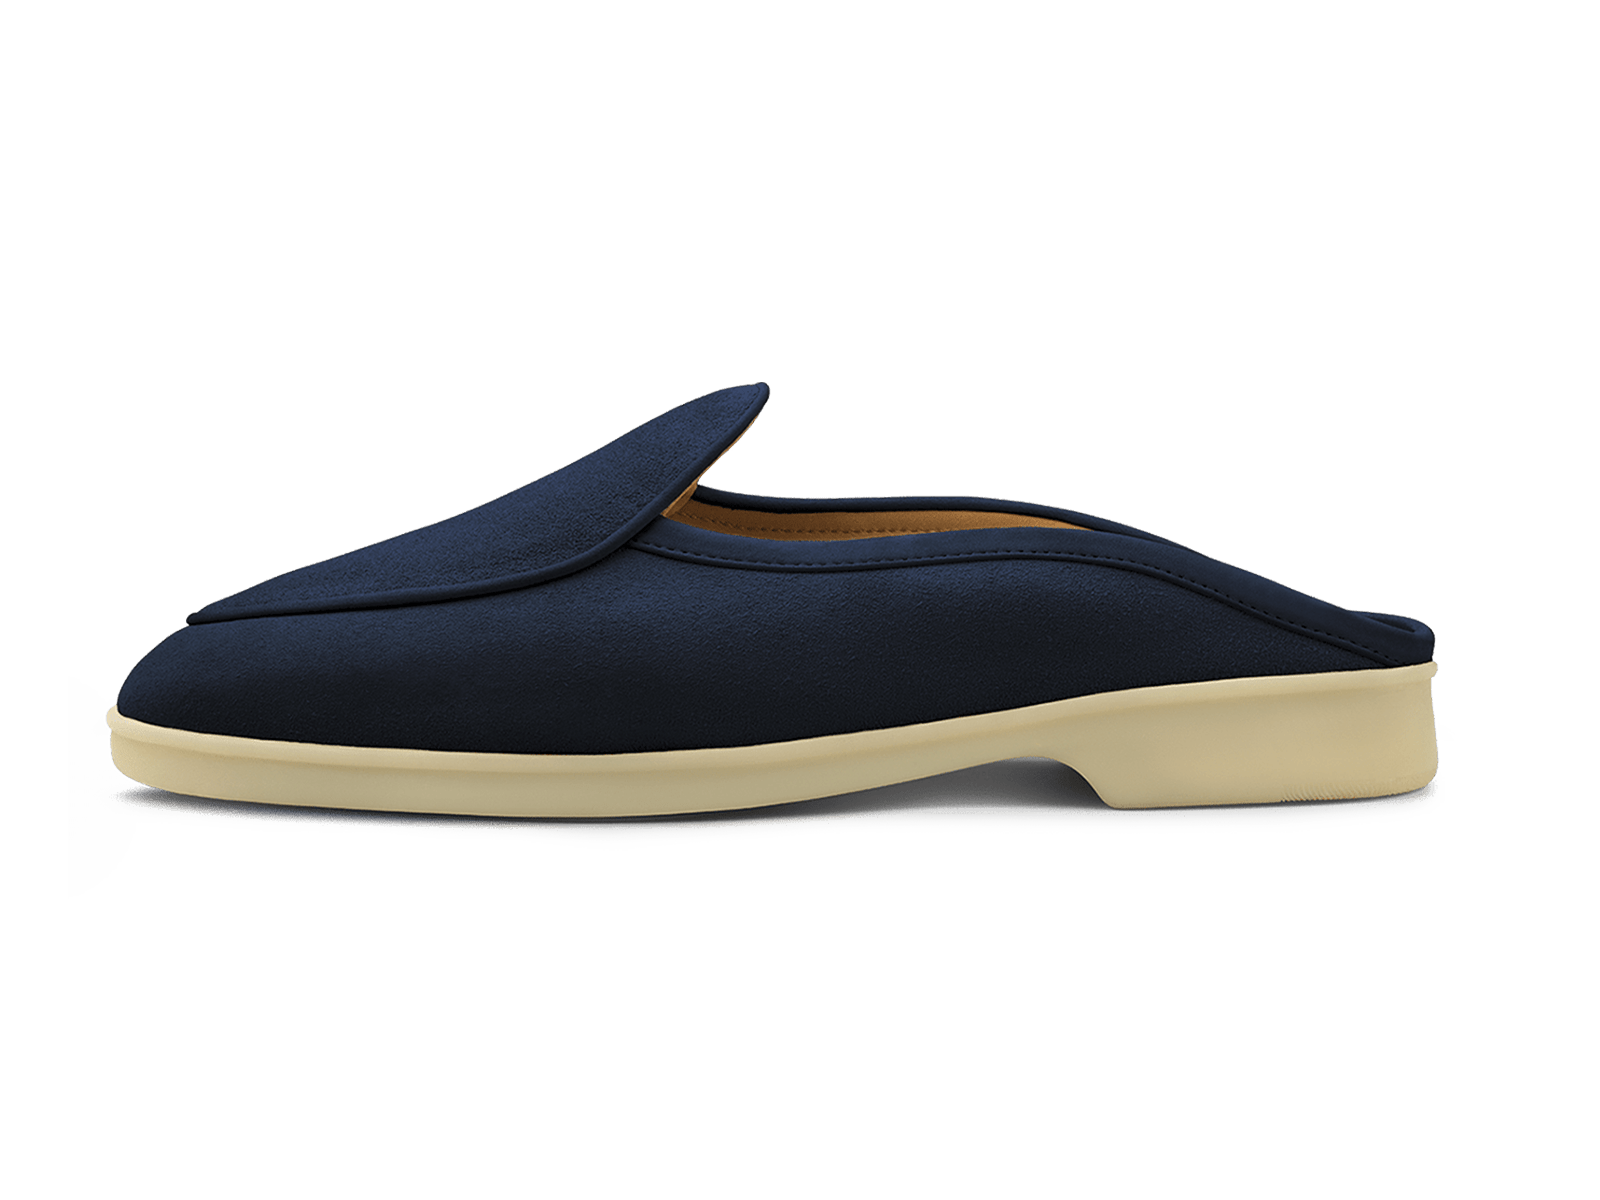 Stride Mule Loafers in Midnight Navy Glove Suede Natural Sole